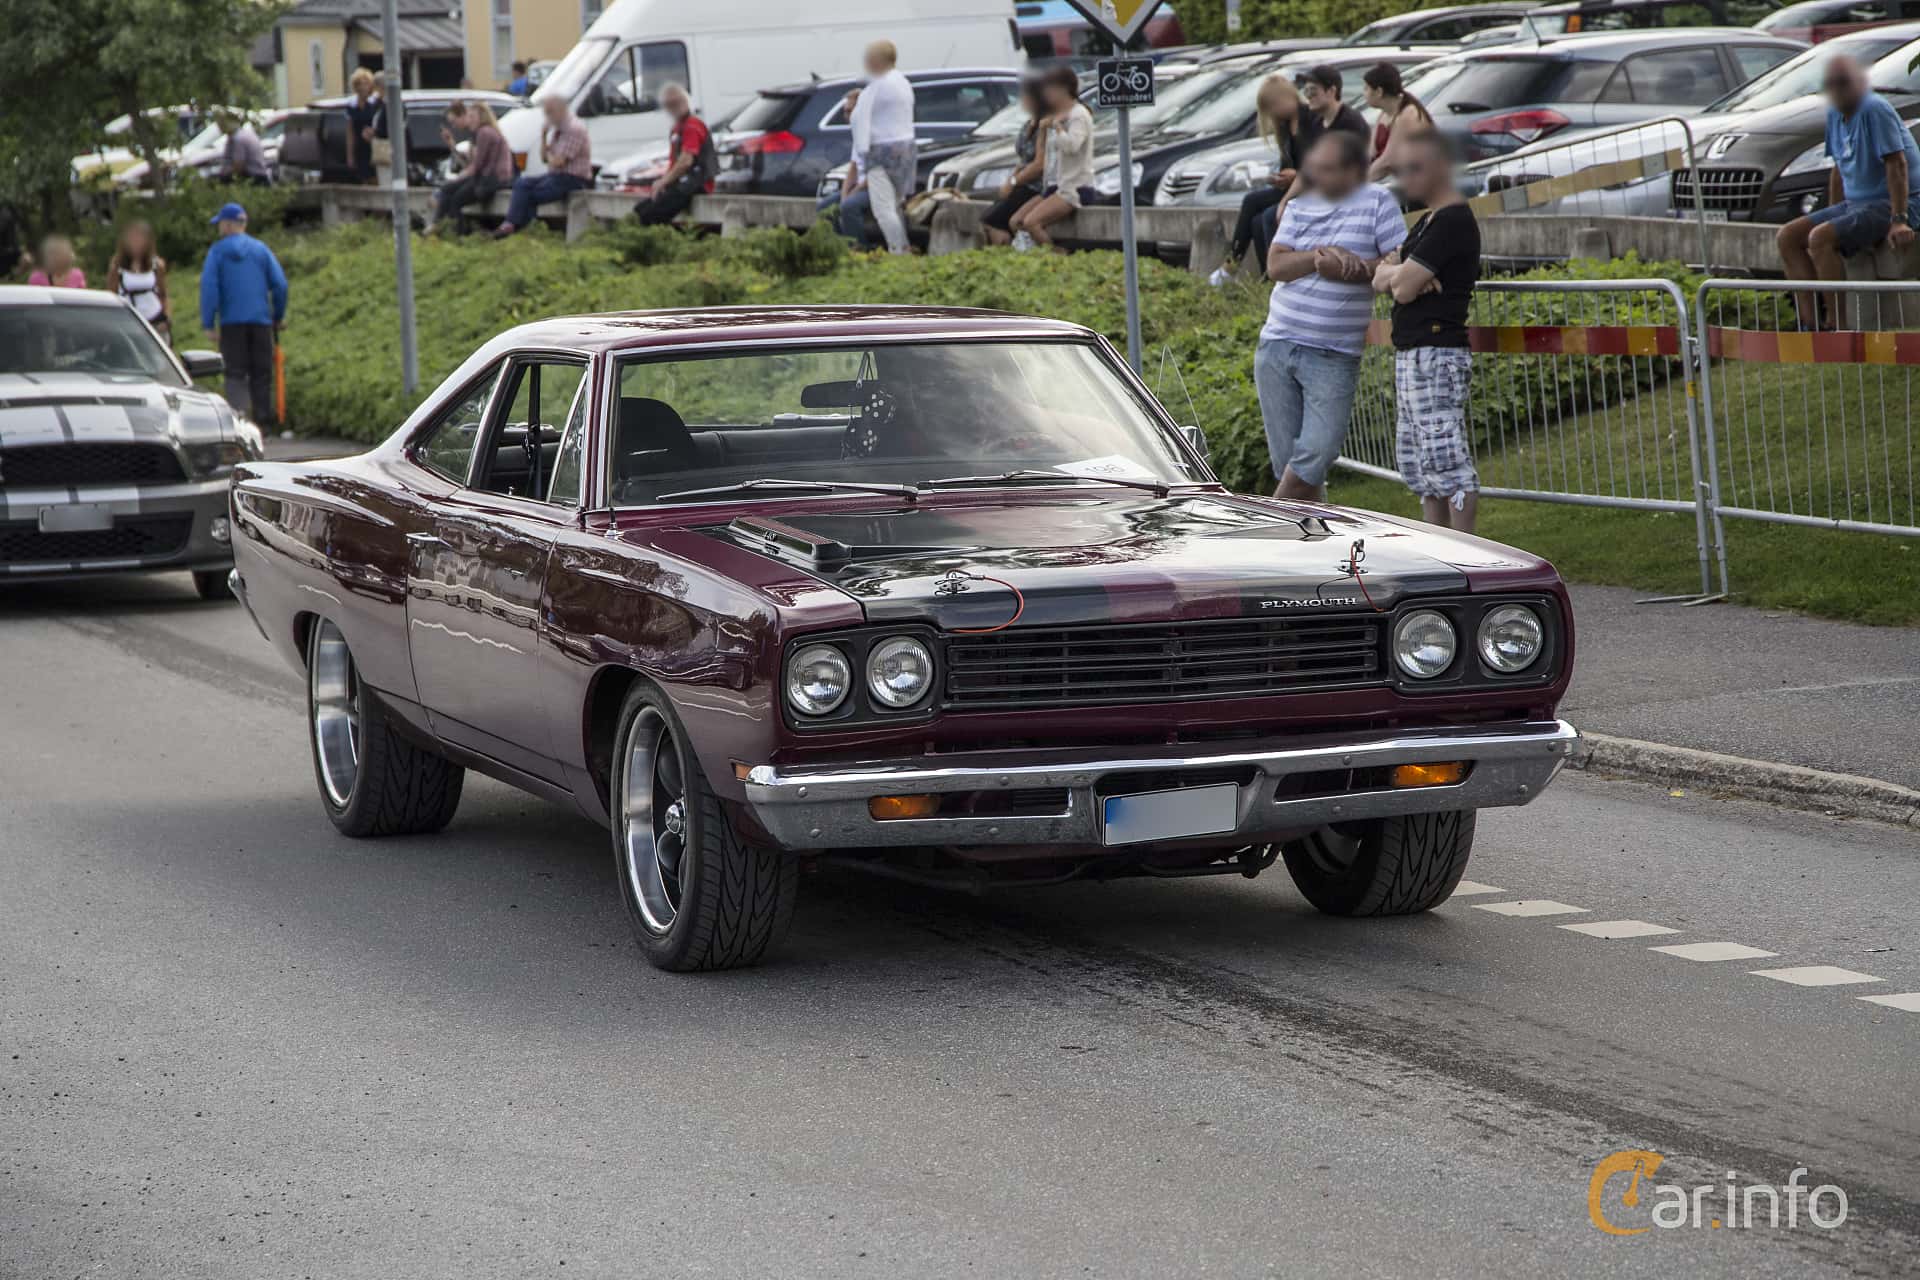 plymouth-road-runner-coupe-front-side-american-carshow-norrtelje-2016-1-281352.jpg